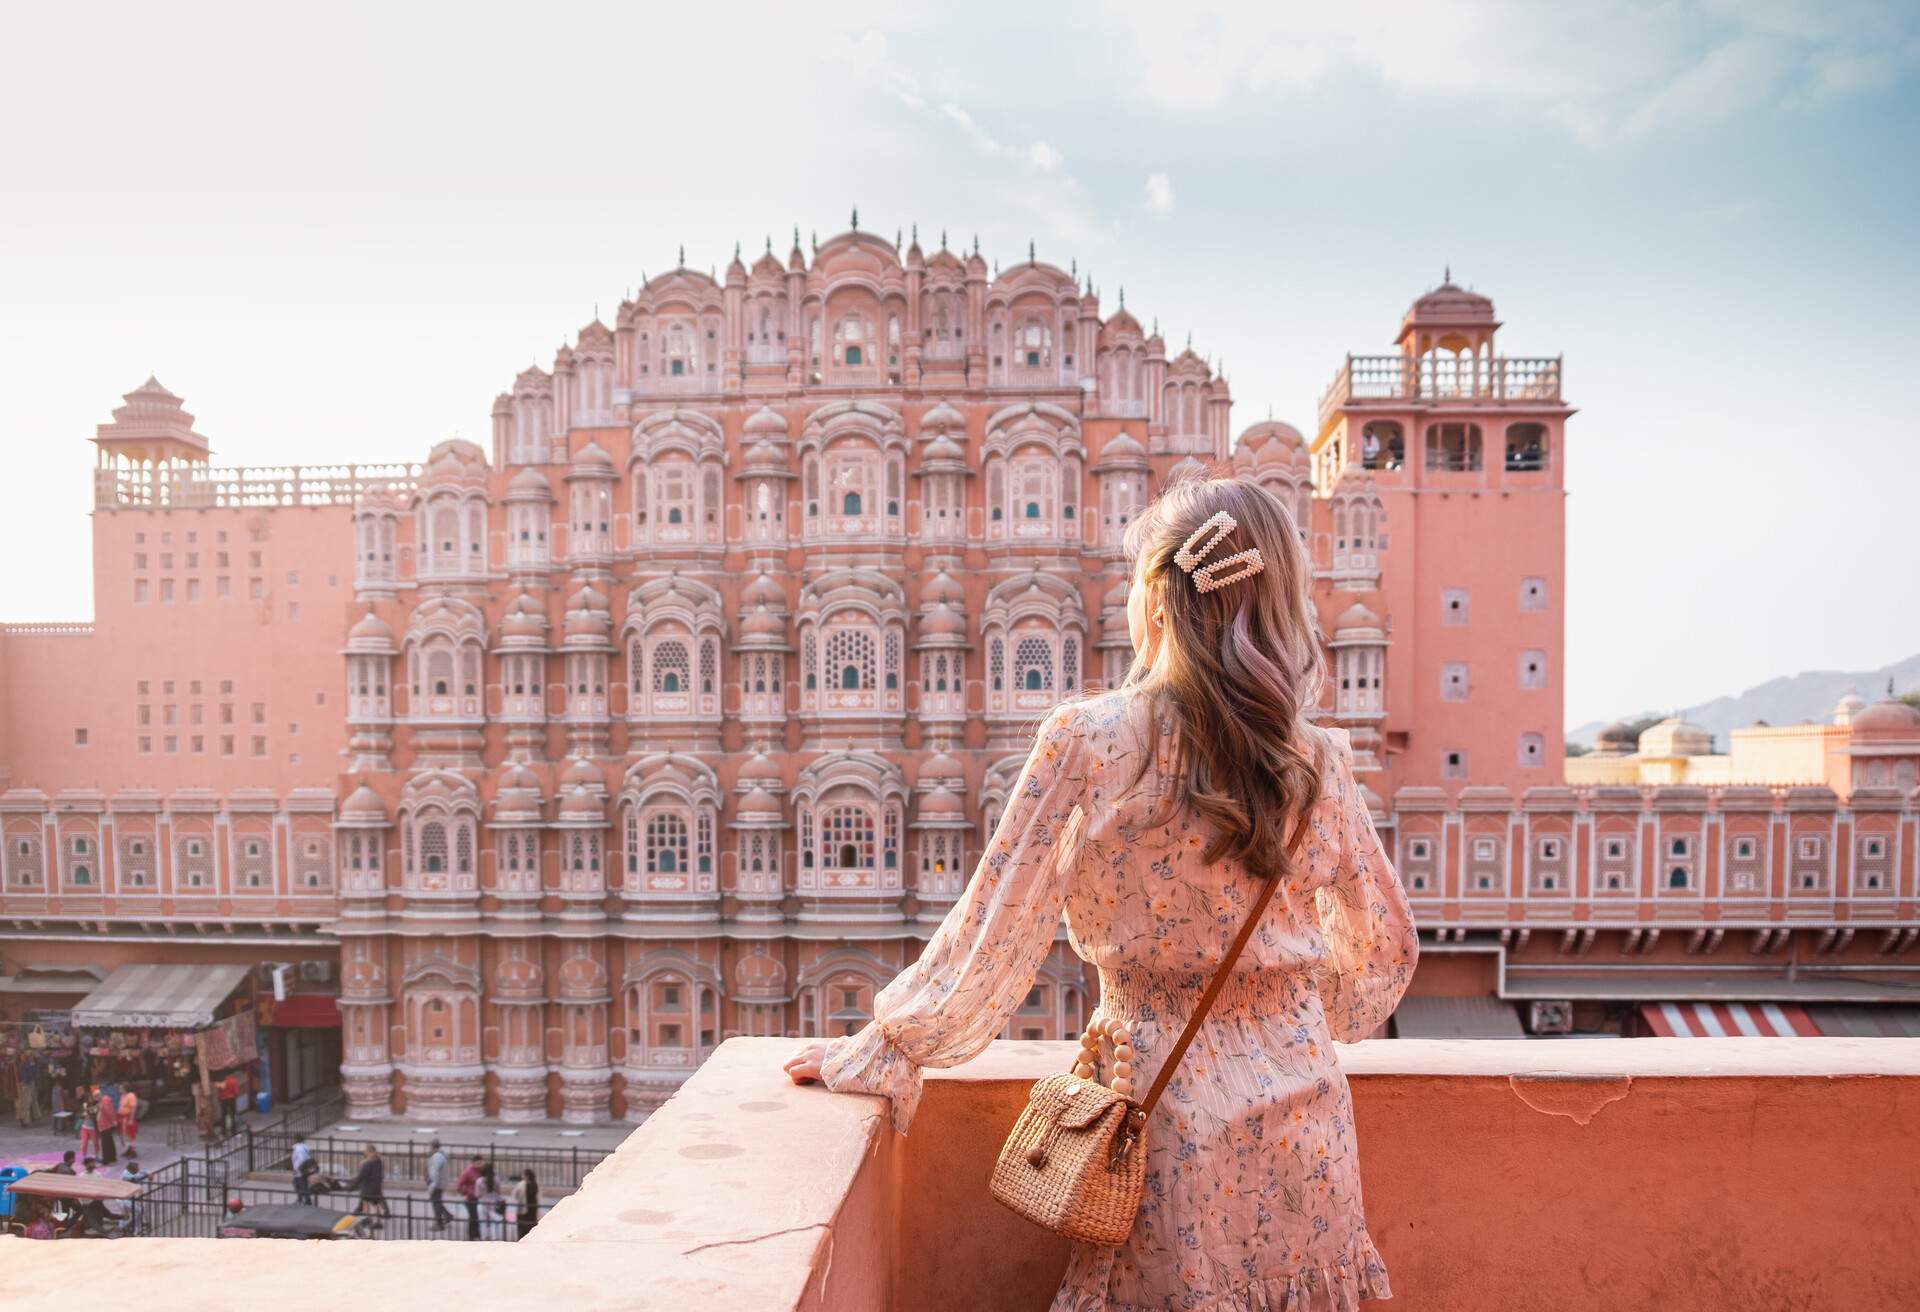 A female tourist stands on the balcony overlooking the picturesque pink-coloured sandstone palace.